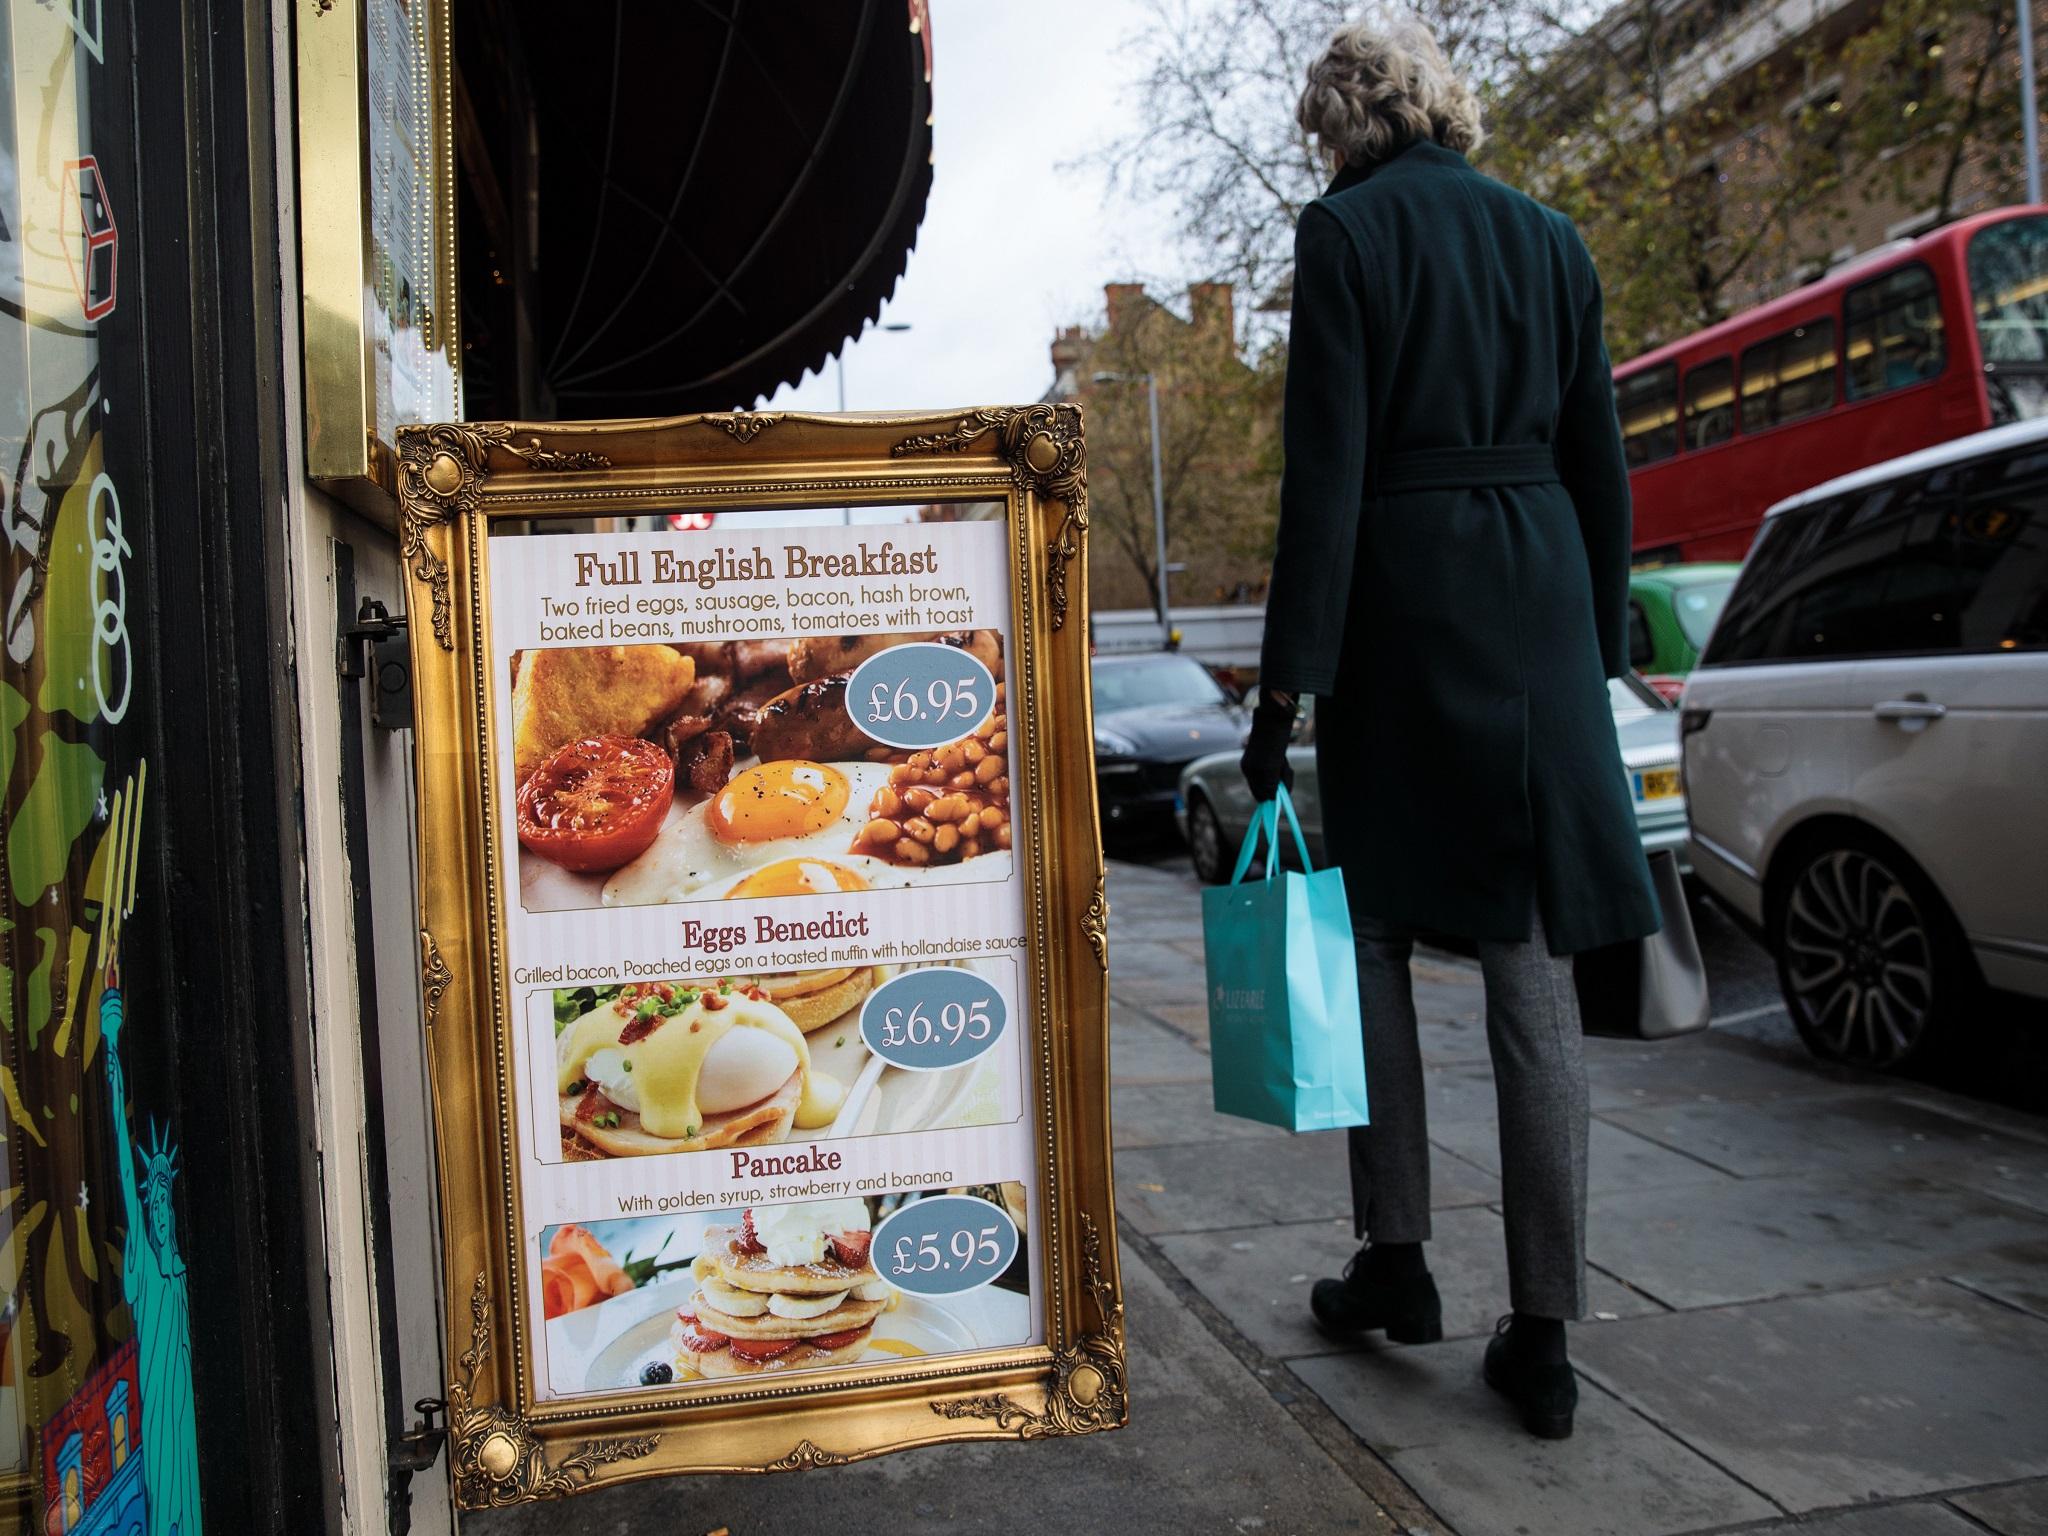 Services – which includes cafes and restaurants – saw a slowdown in November